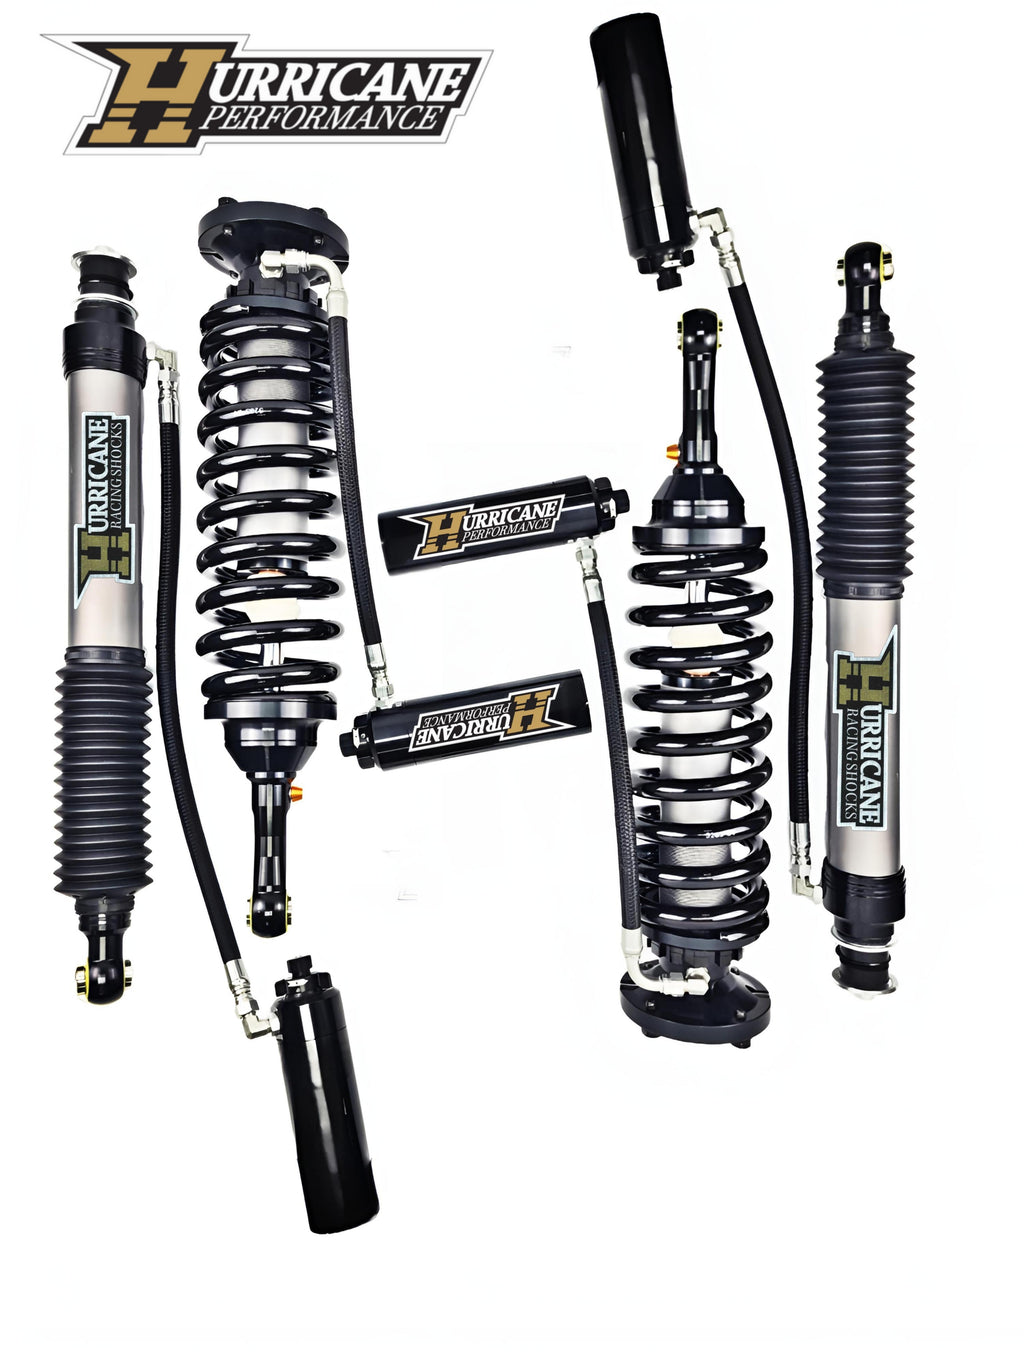 HURRICANE PERFORMANCE EXTREME SERIES 2.5 DOUBLE ADJUSTABLE FRONT COIL-OVER & 2.5 REAR SHOCKS FOR LAND CRUISER LC200